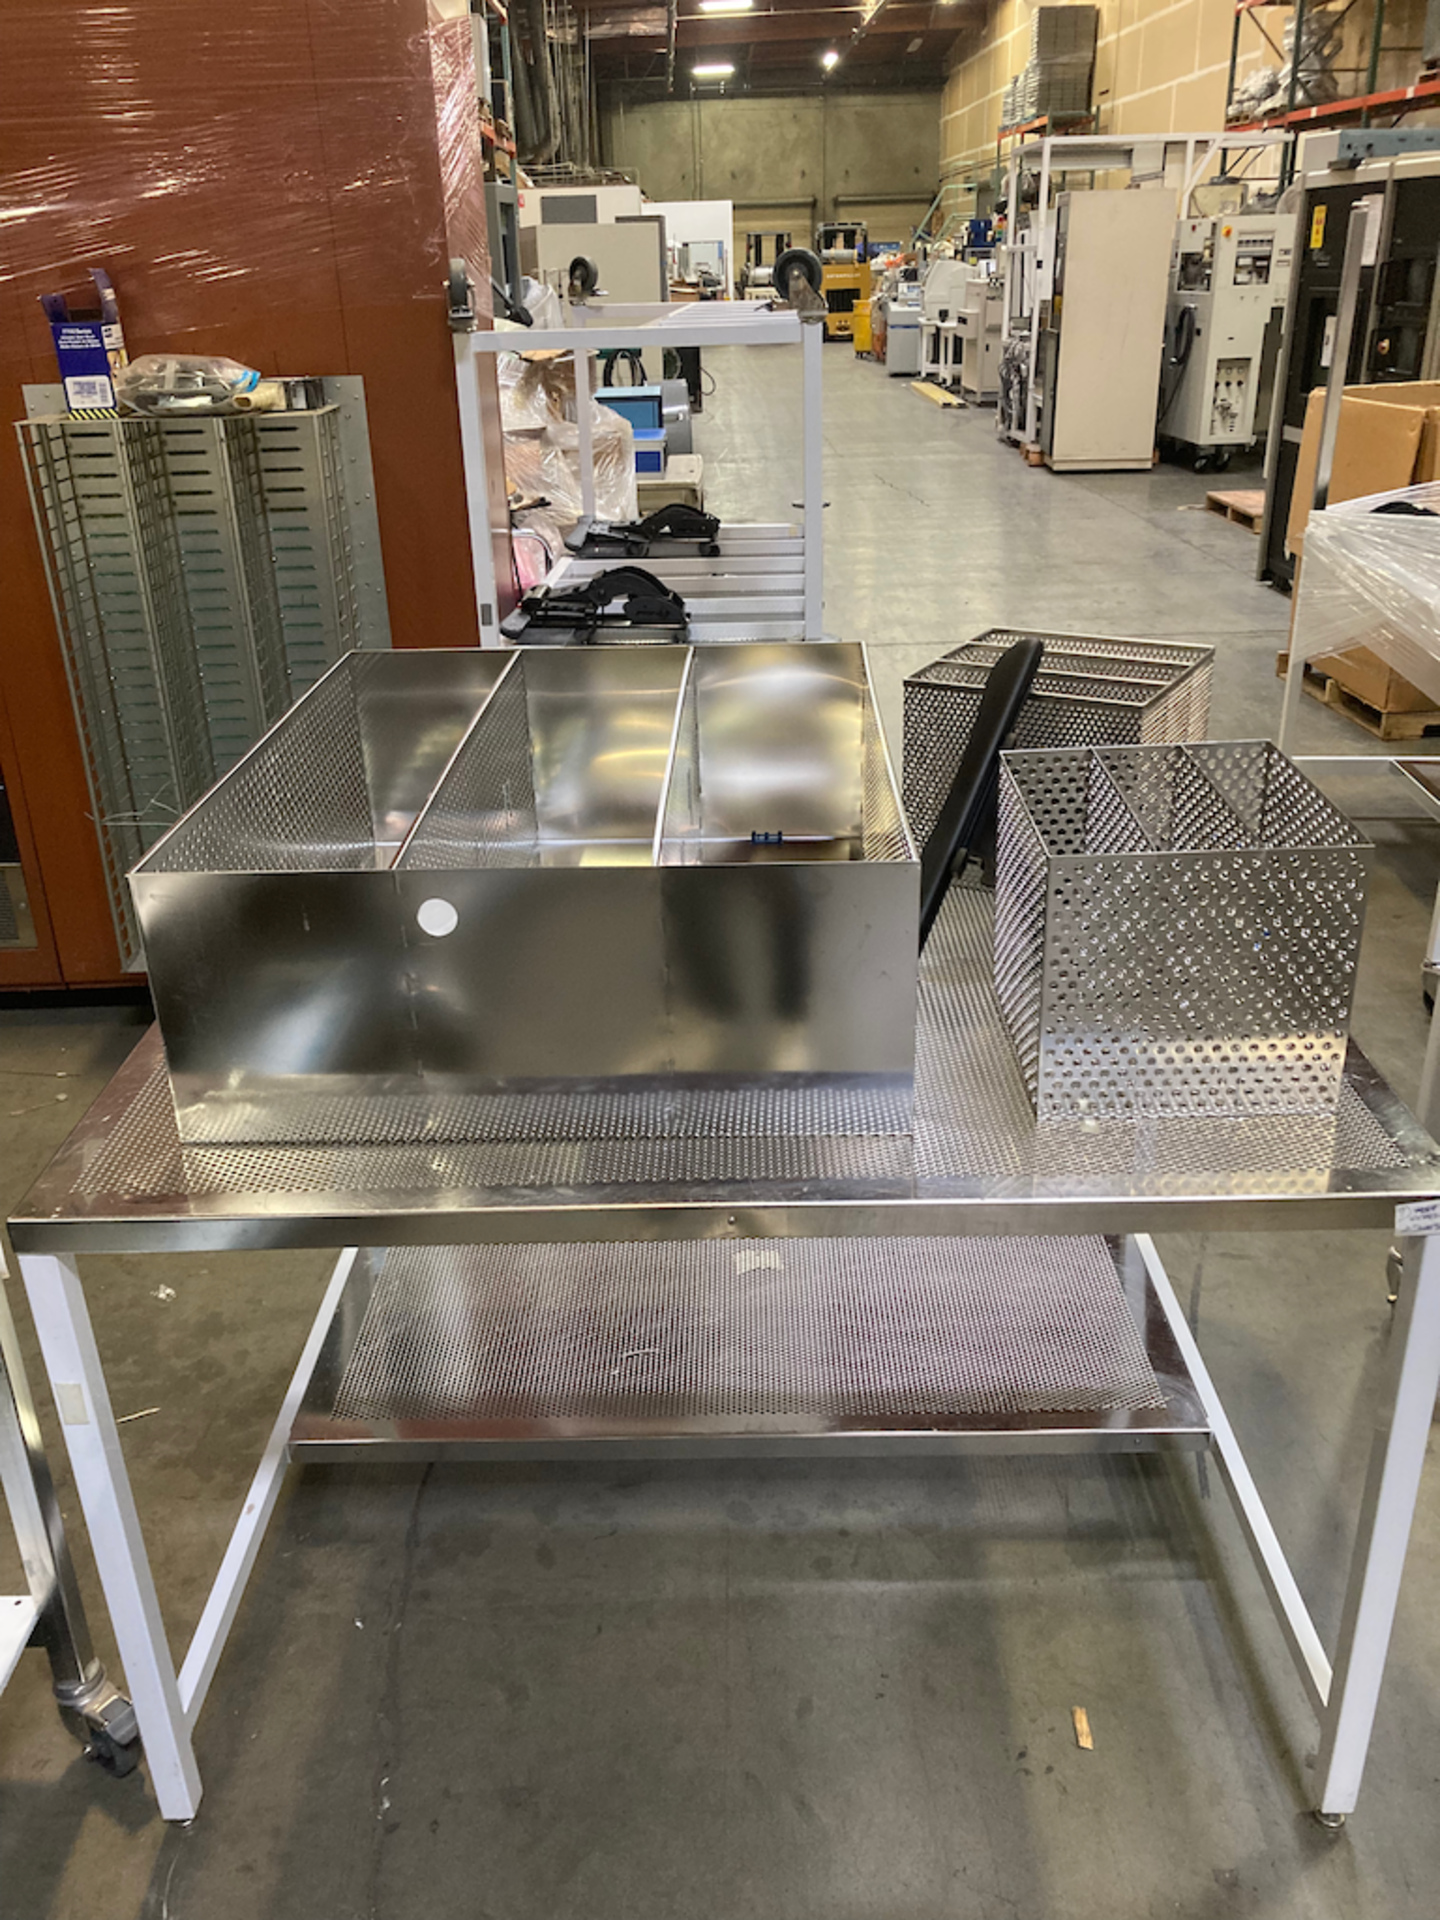 55 x 42 x 35 Perforated Stainless Steel Cleanroom Table Bottom Shelf - Image 2 of 3